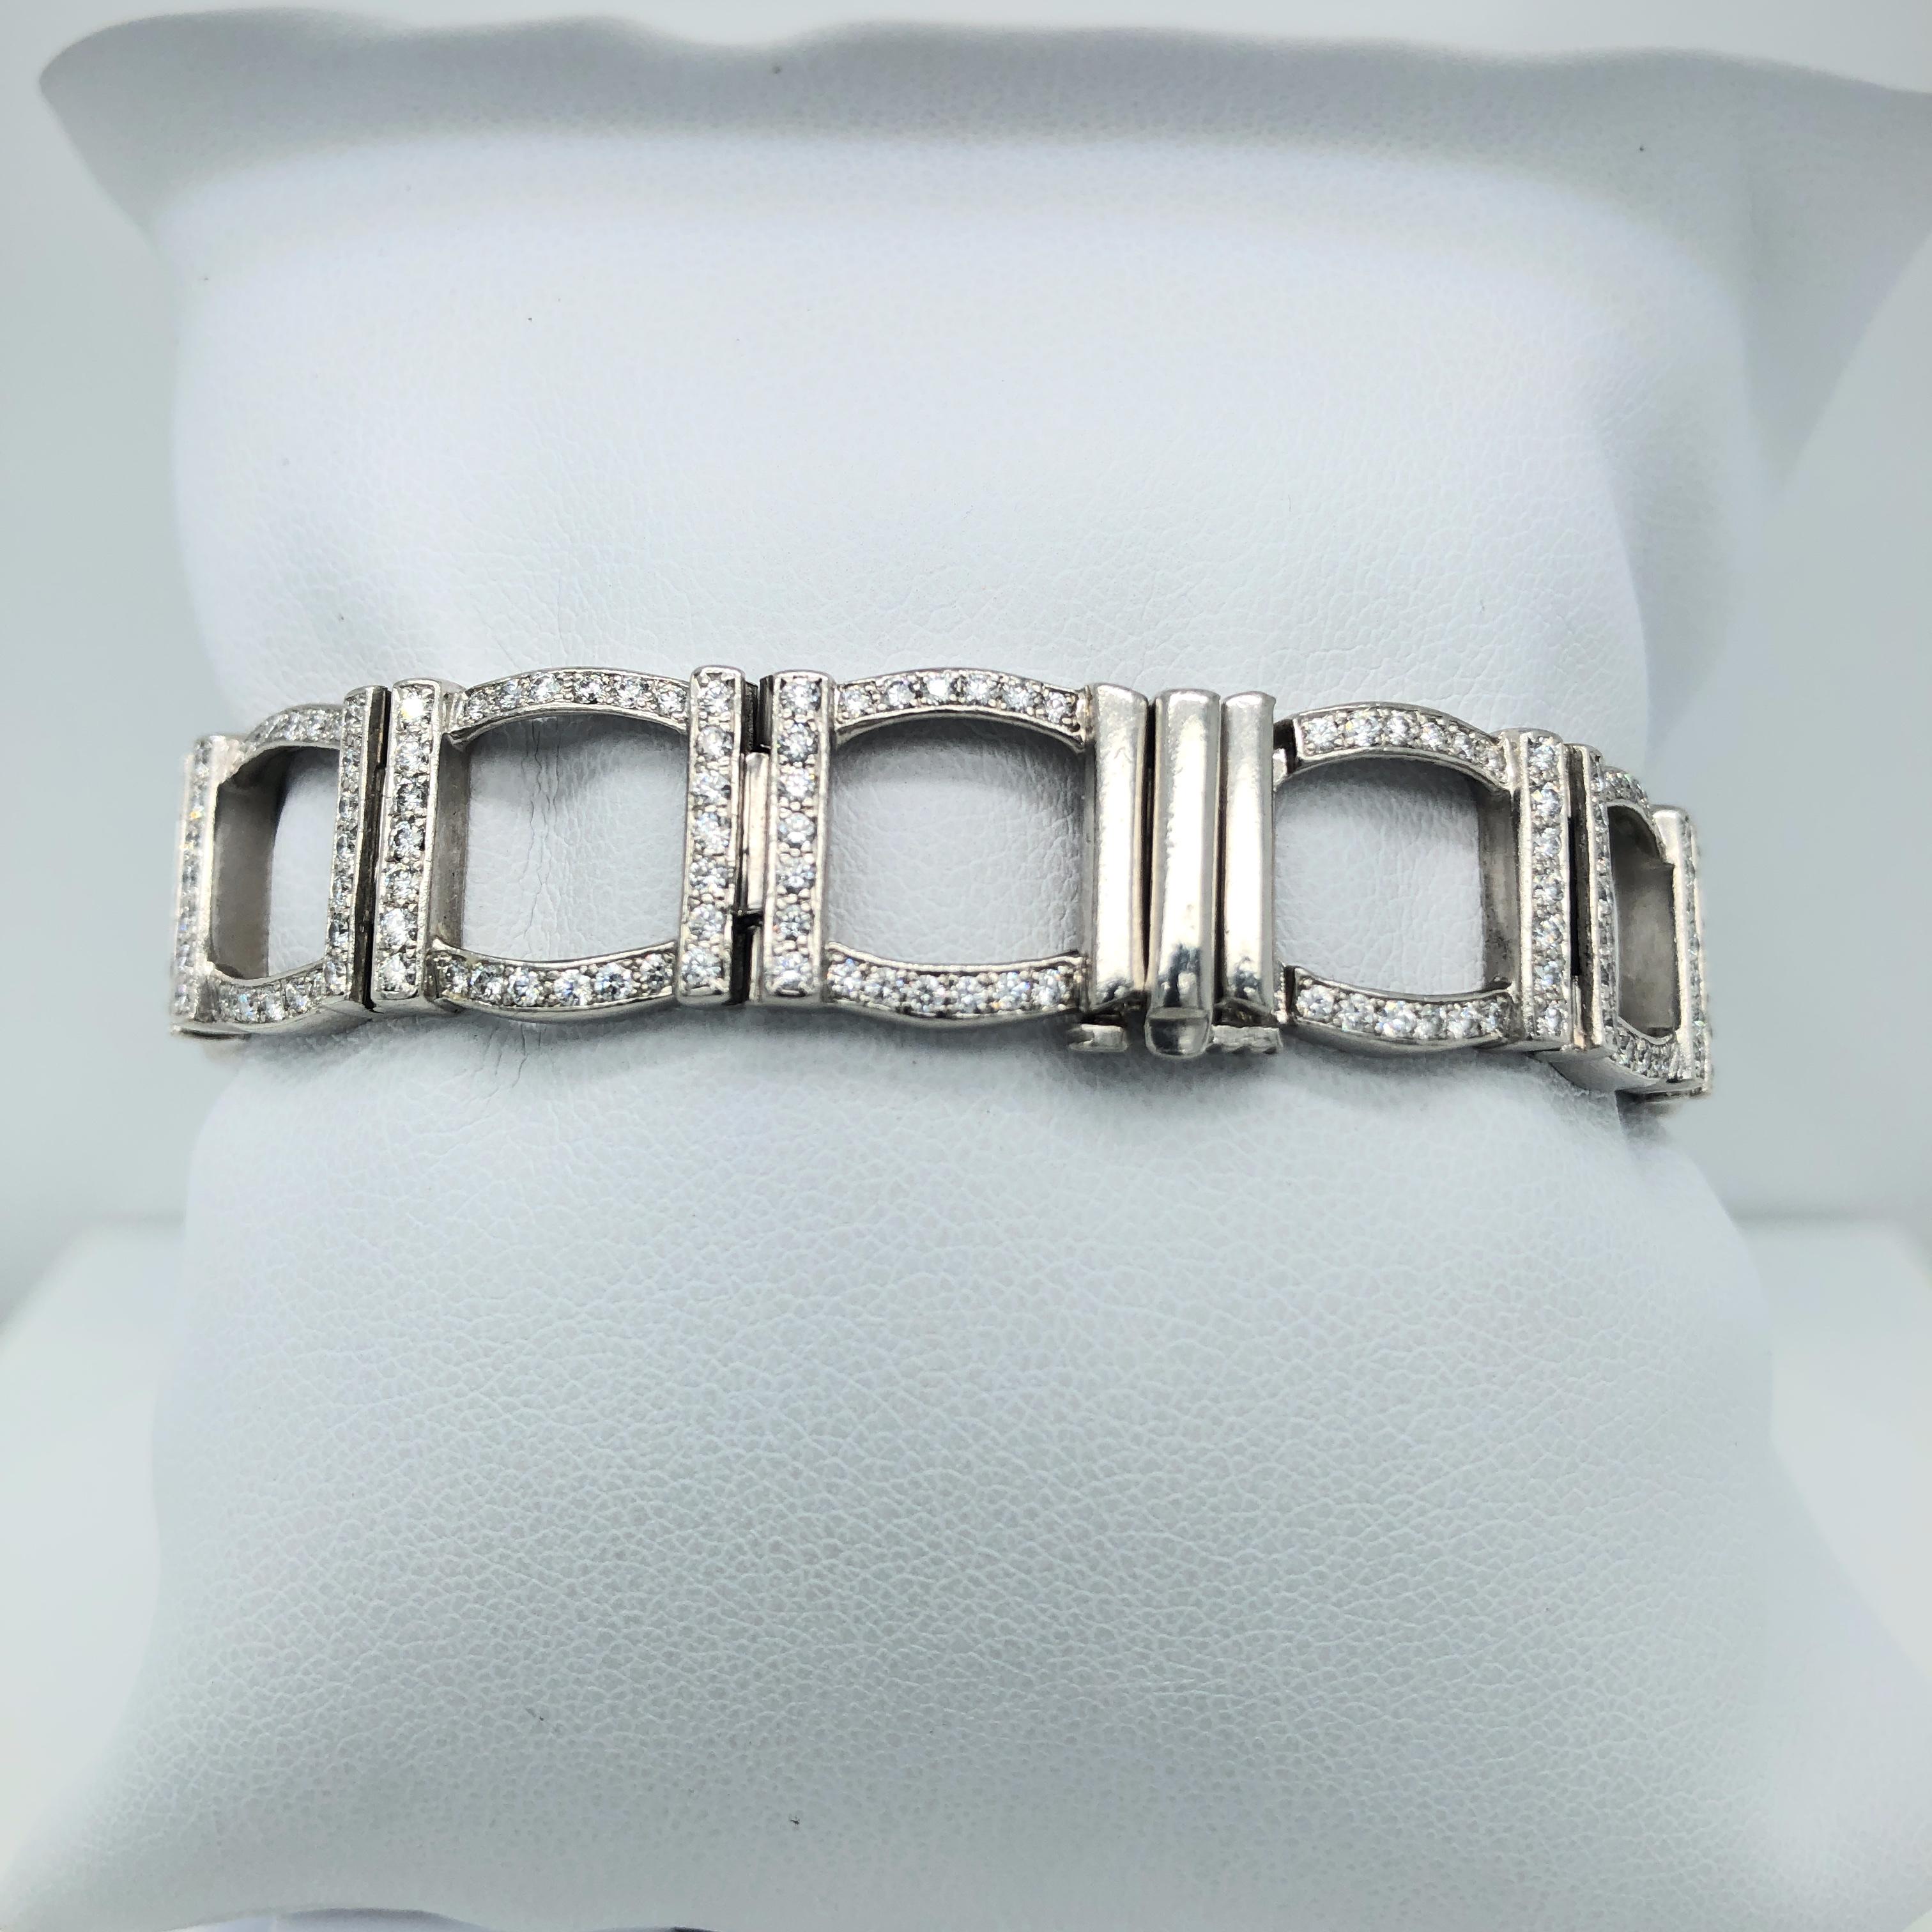 Tiffany & Co. diamond bracelet with window motif, set in platinum. Has a total of 6cts round cut diamonds. Stamped TIFANY & Co. PT950